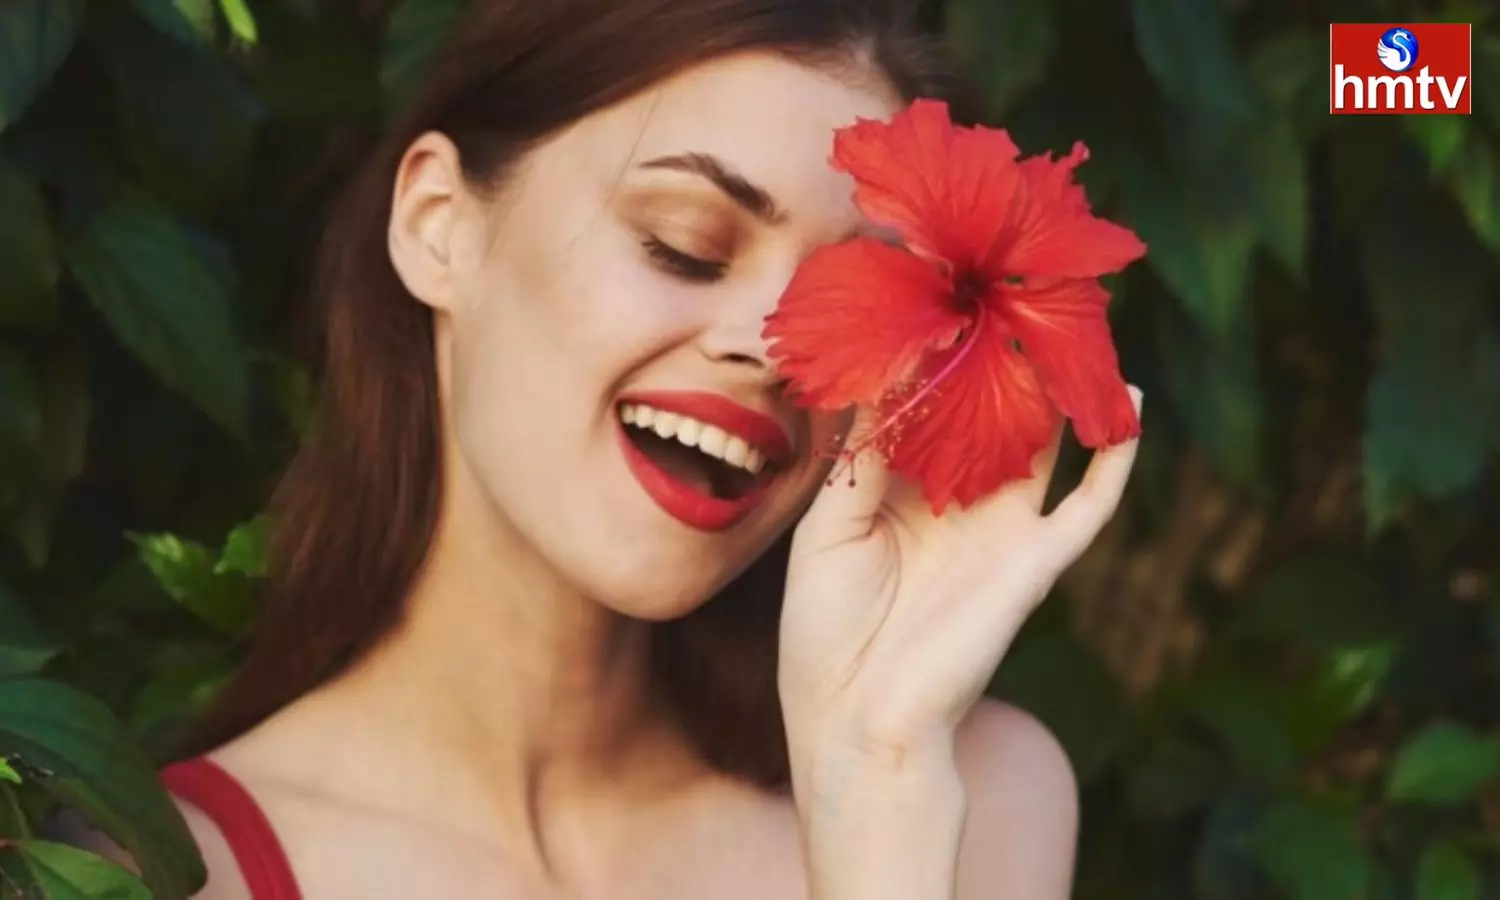 Applying Hibiscus Flowers To The Skin Like This Gives A Natural Glow To The Face